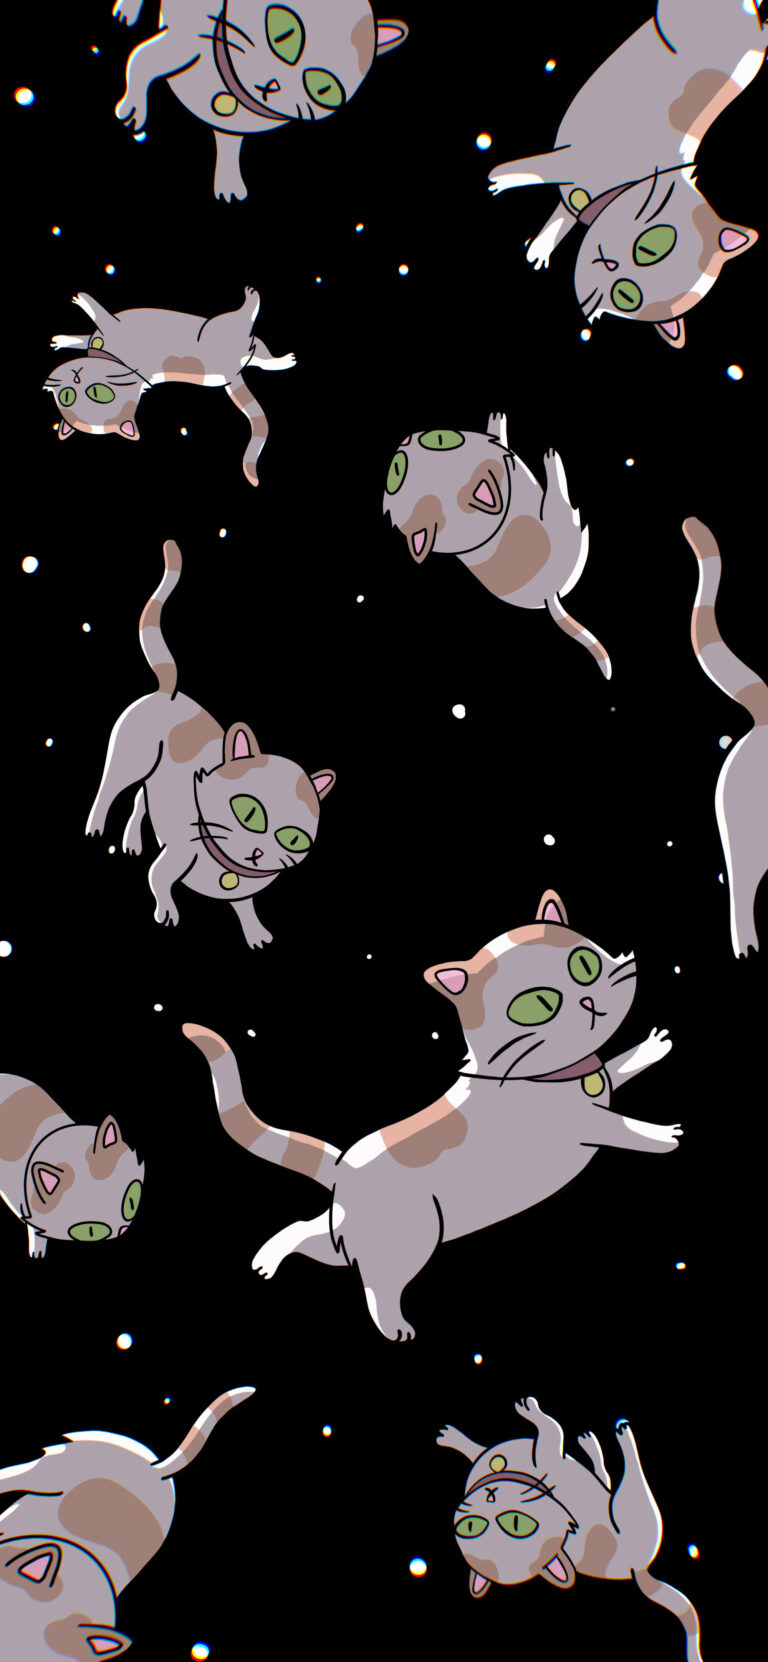 Rick and Morty Wallpapers 4k with Schrödinger's Cats in Space - W-Clan